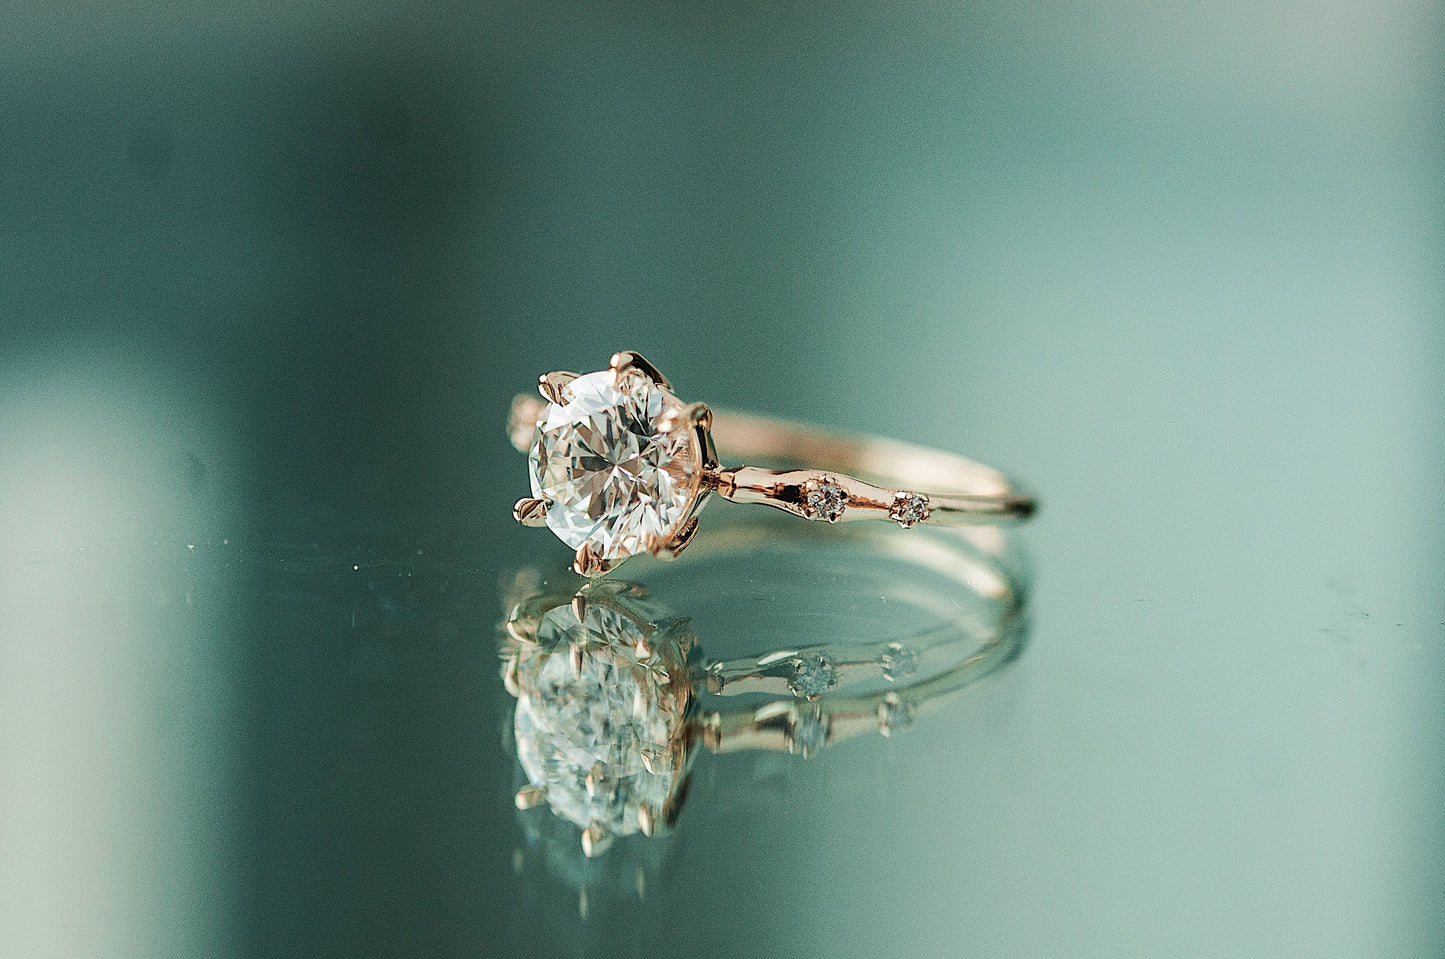 Ingenue Solitaire Ring - Ready-to-ship